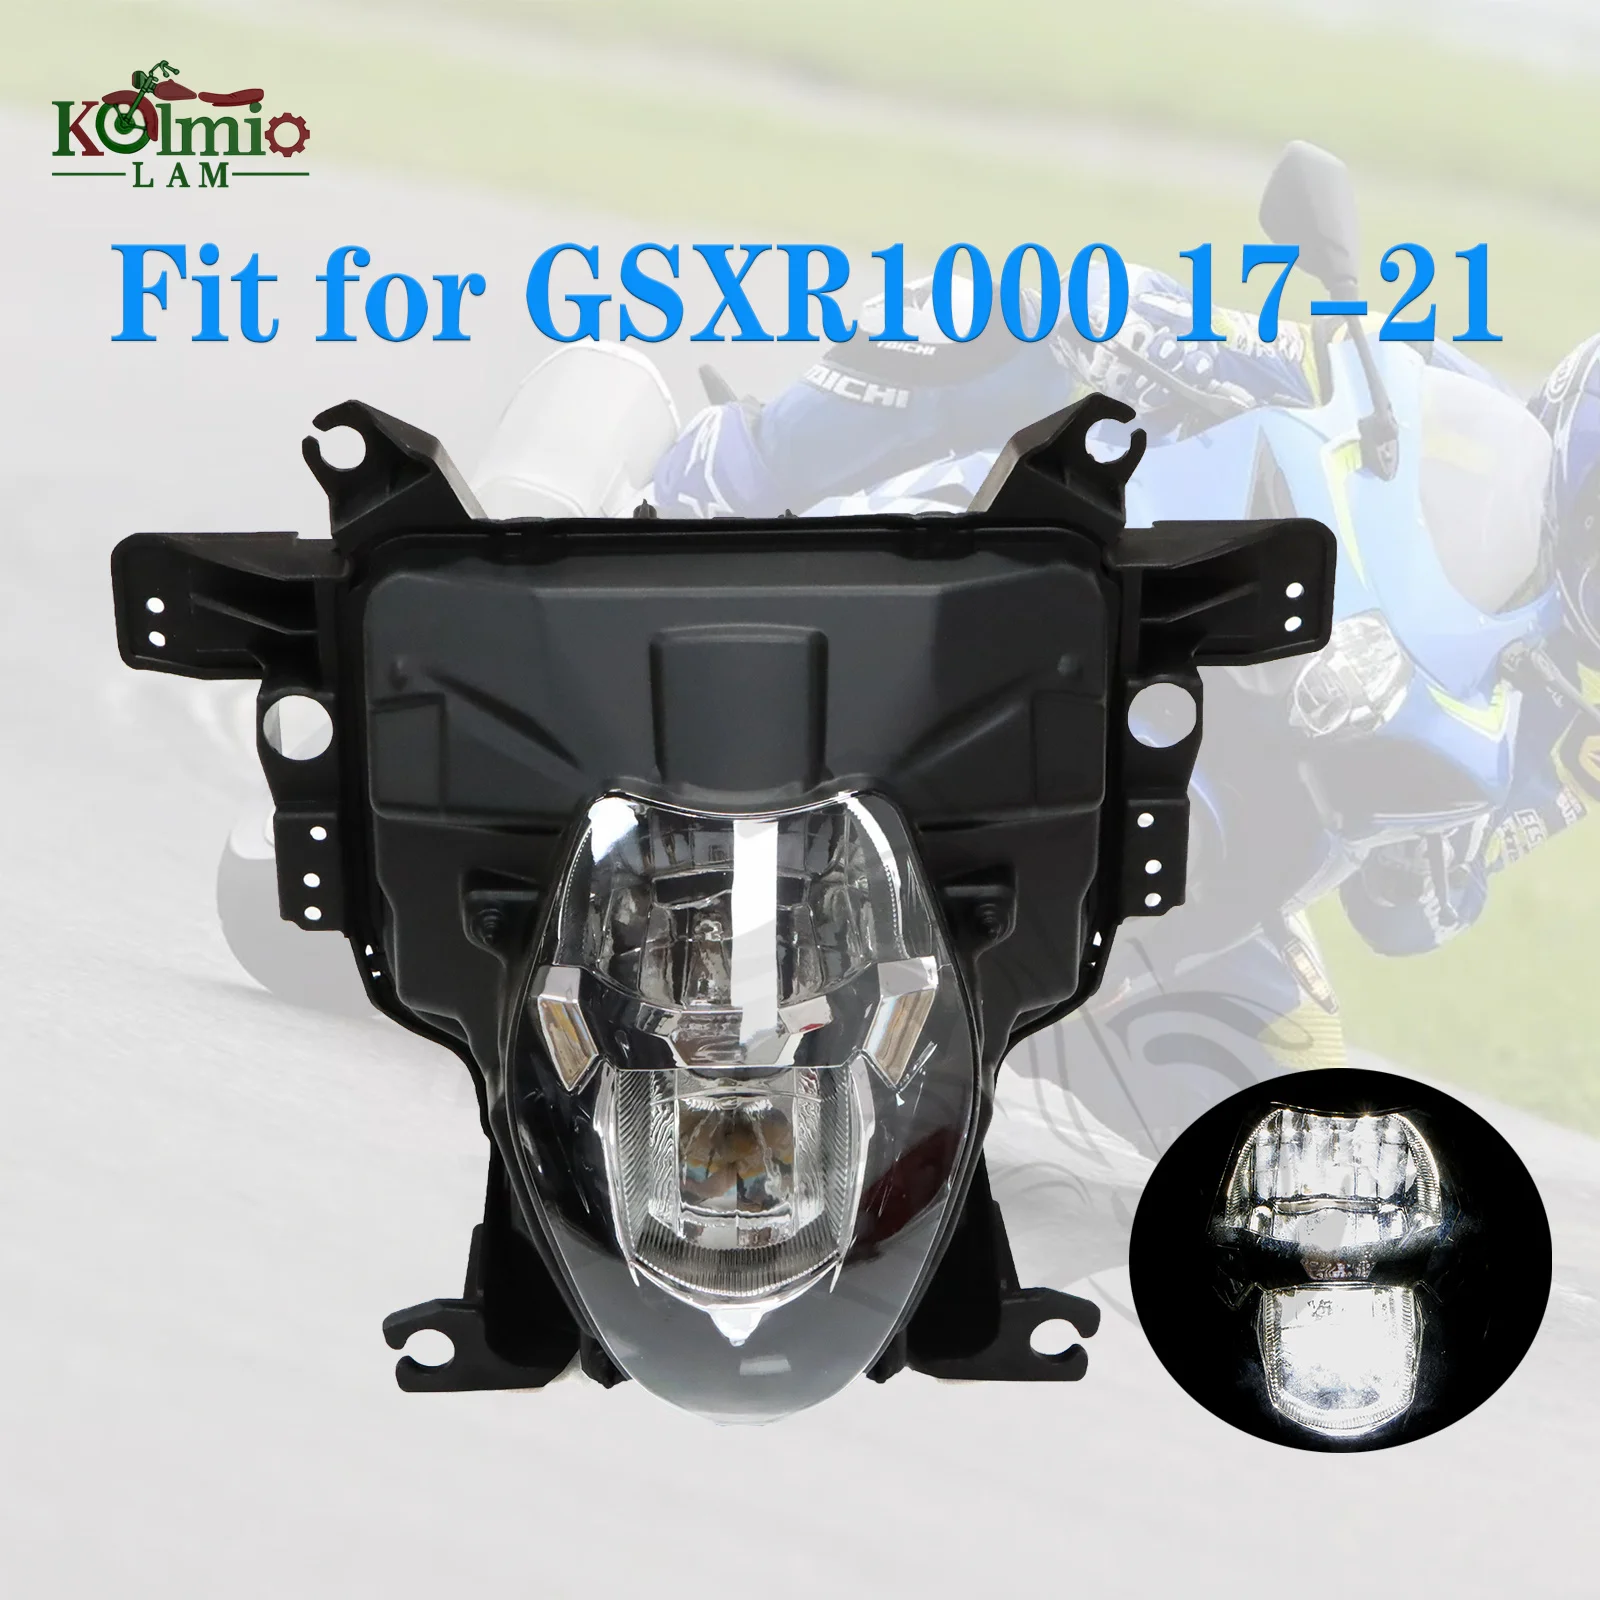 Fit for SUZUKI 2017 - 2022 GSXR1000 GSX-R 1000 Motorcycle LED Front Headlight Assembly Headlamp GSXR 1000 2018 2019 2020 2021